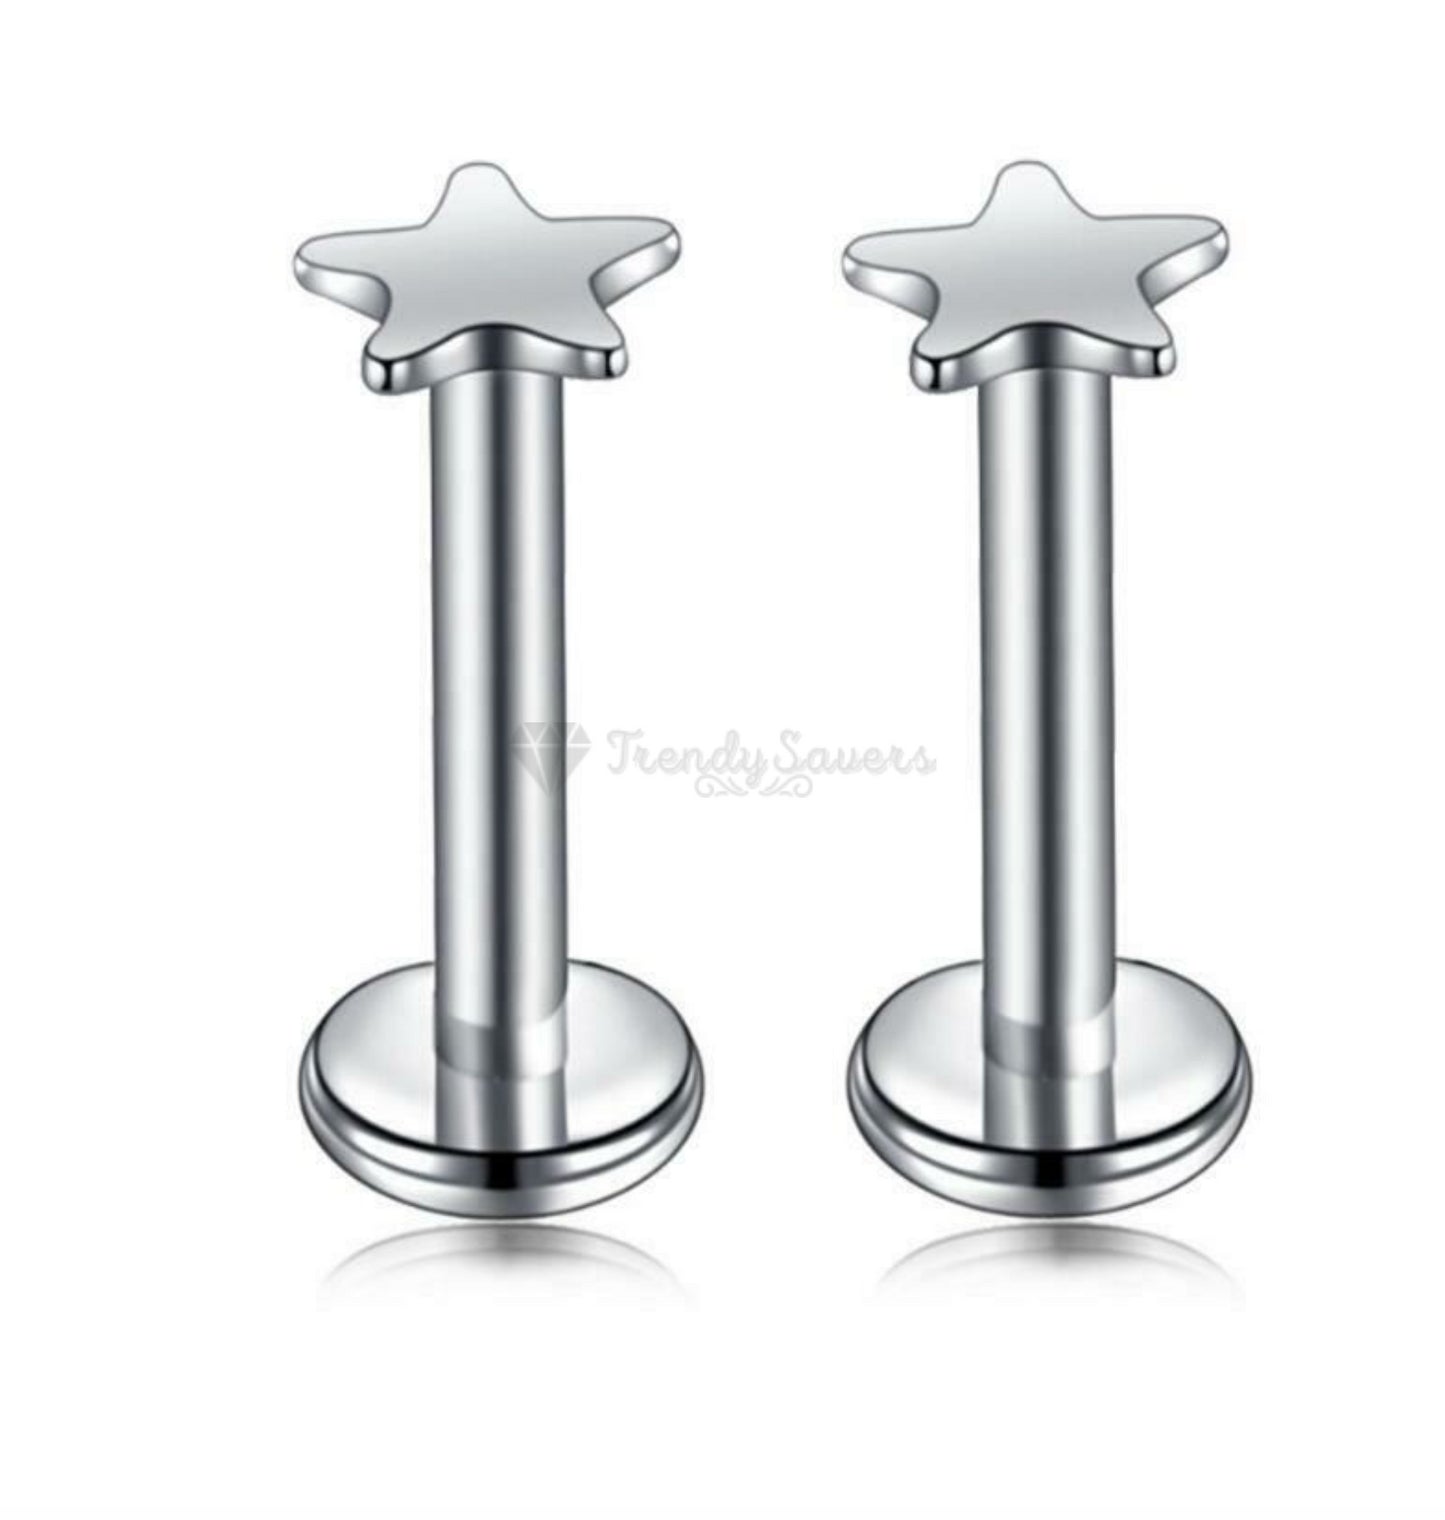 3MM Silver Star Shape Labret Monroe Cartilage Helix Tragus Conch Stud Ring Pair